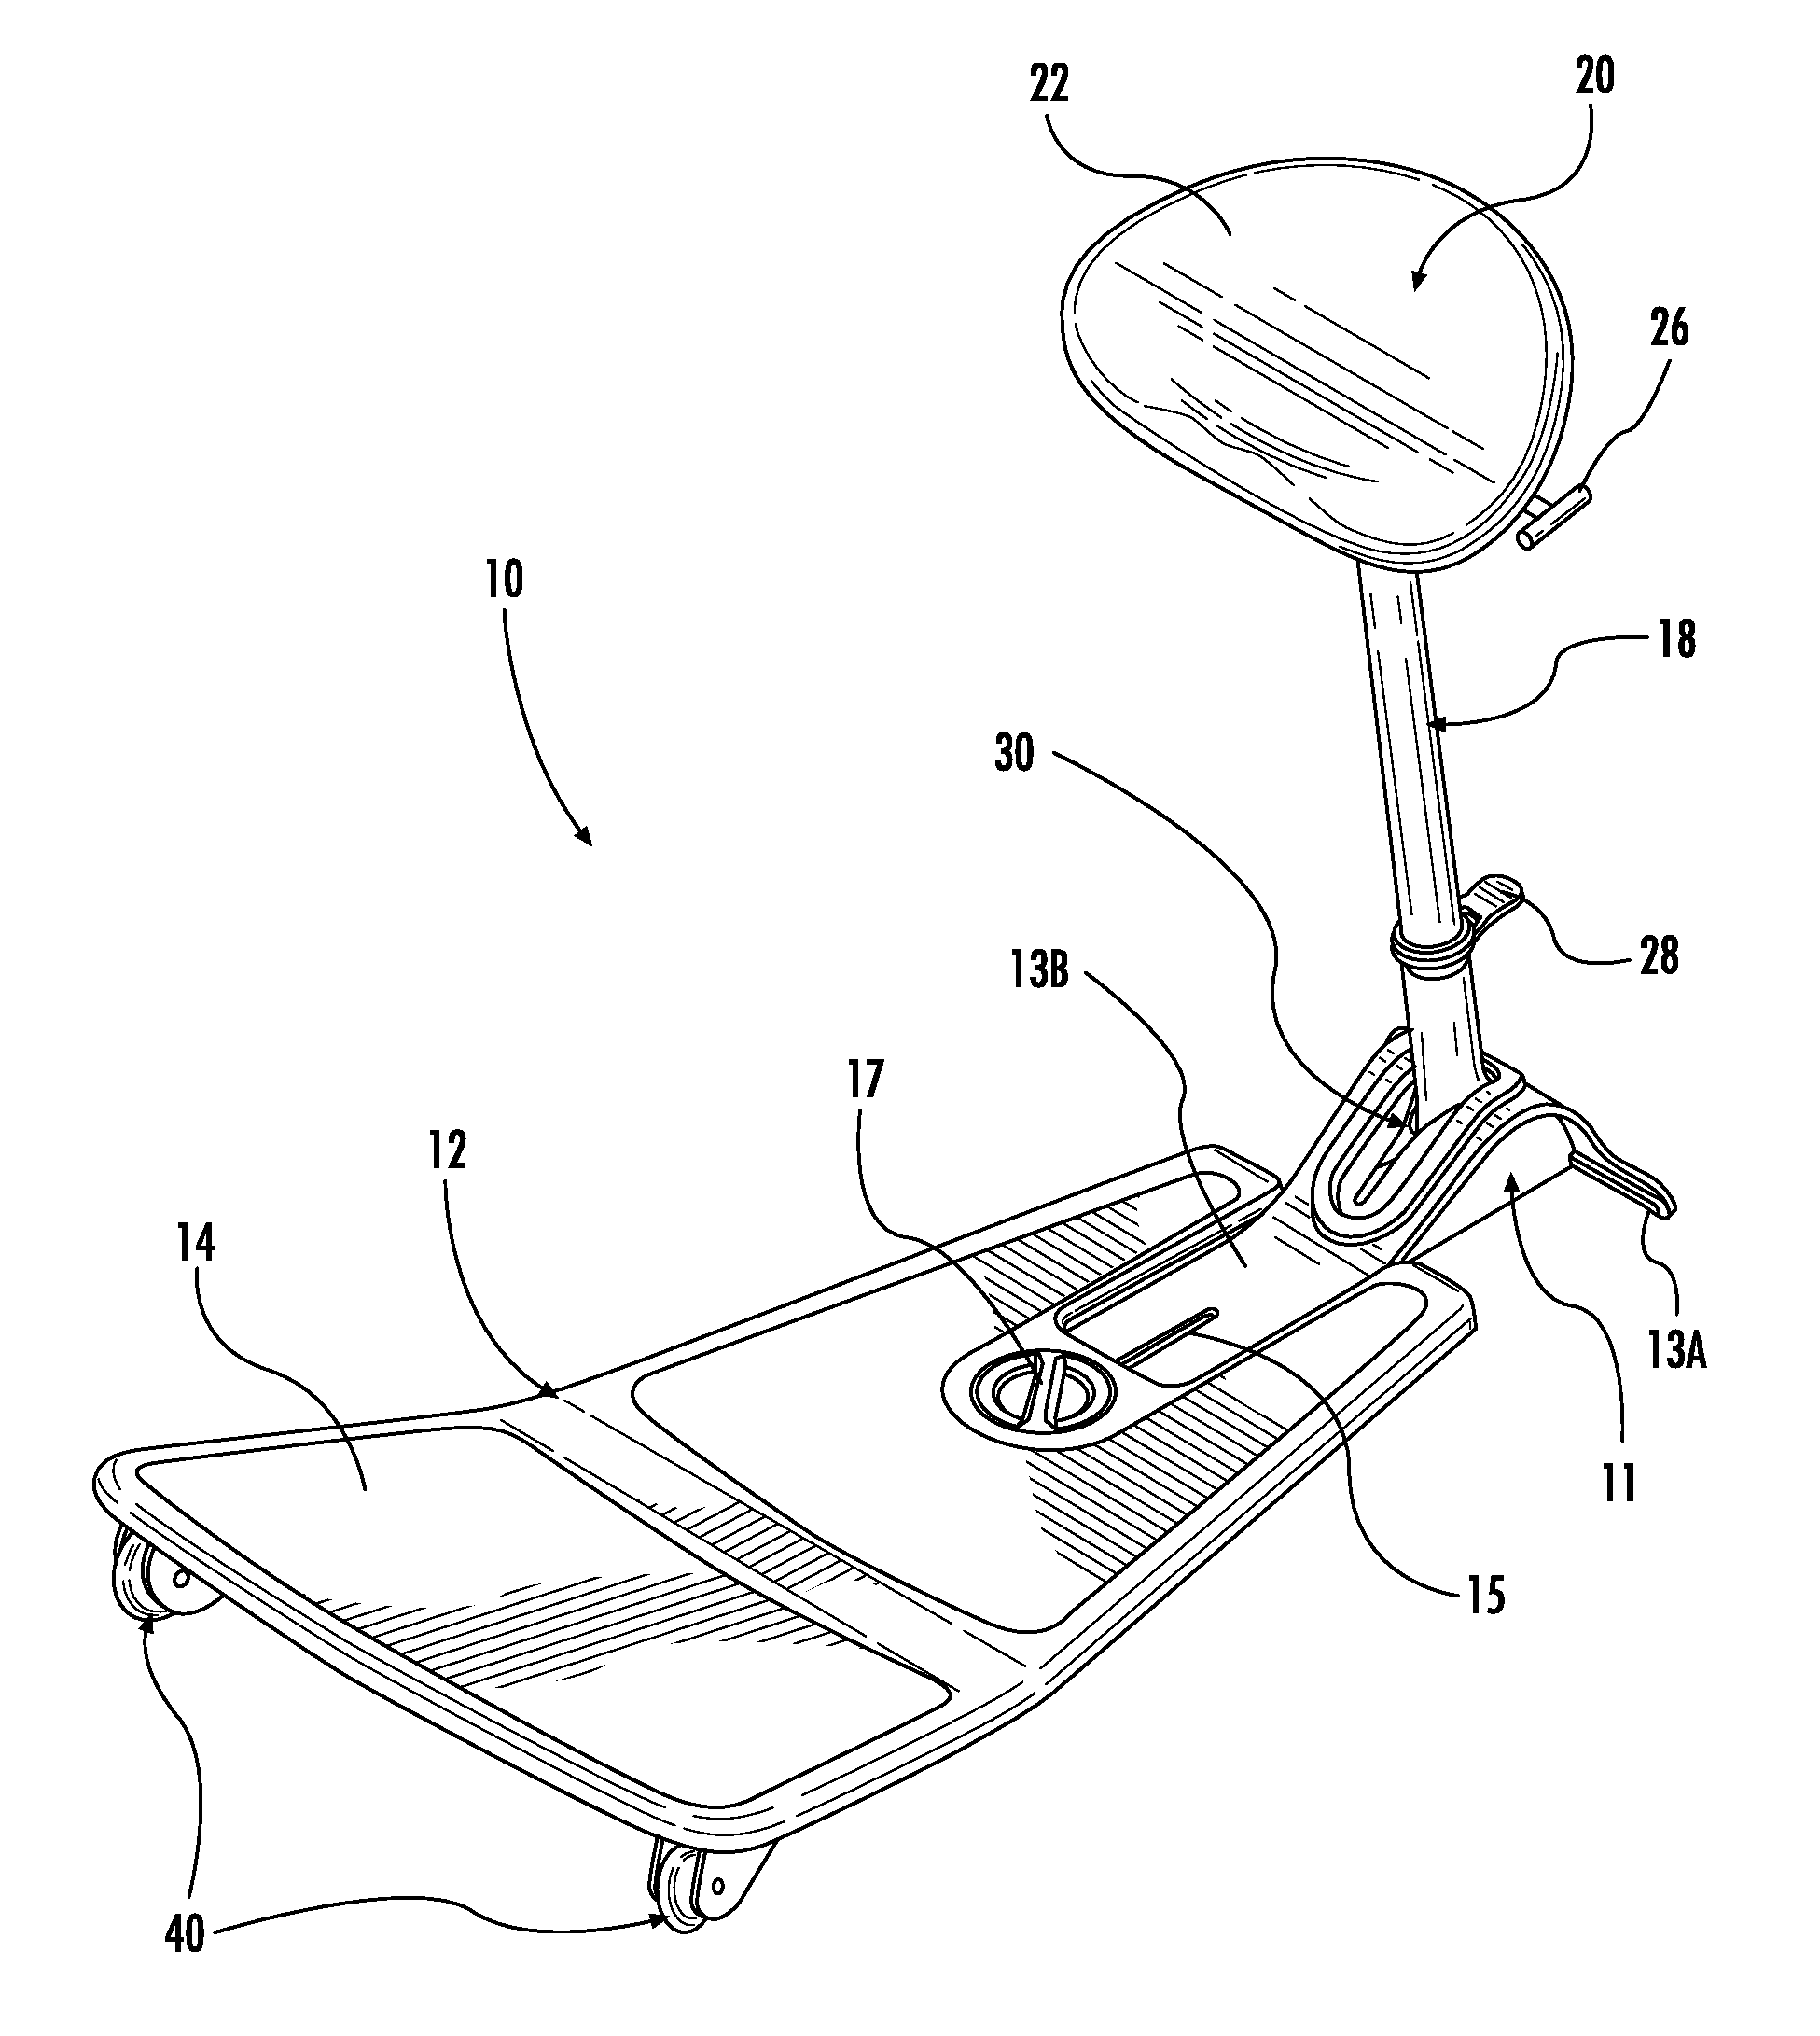 Upright active-sitting seat